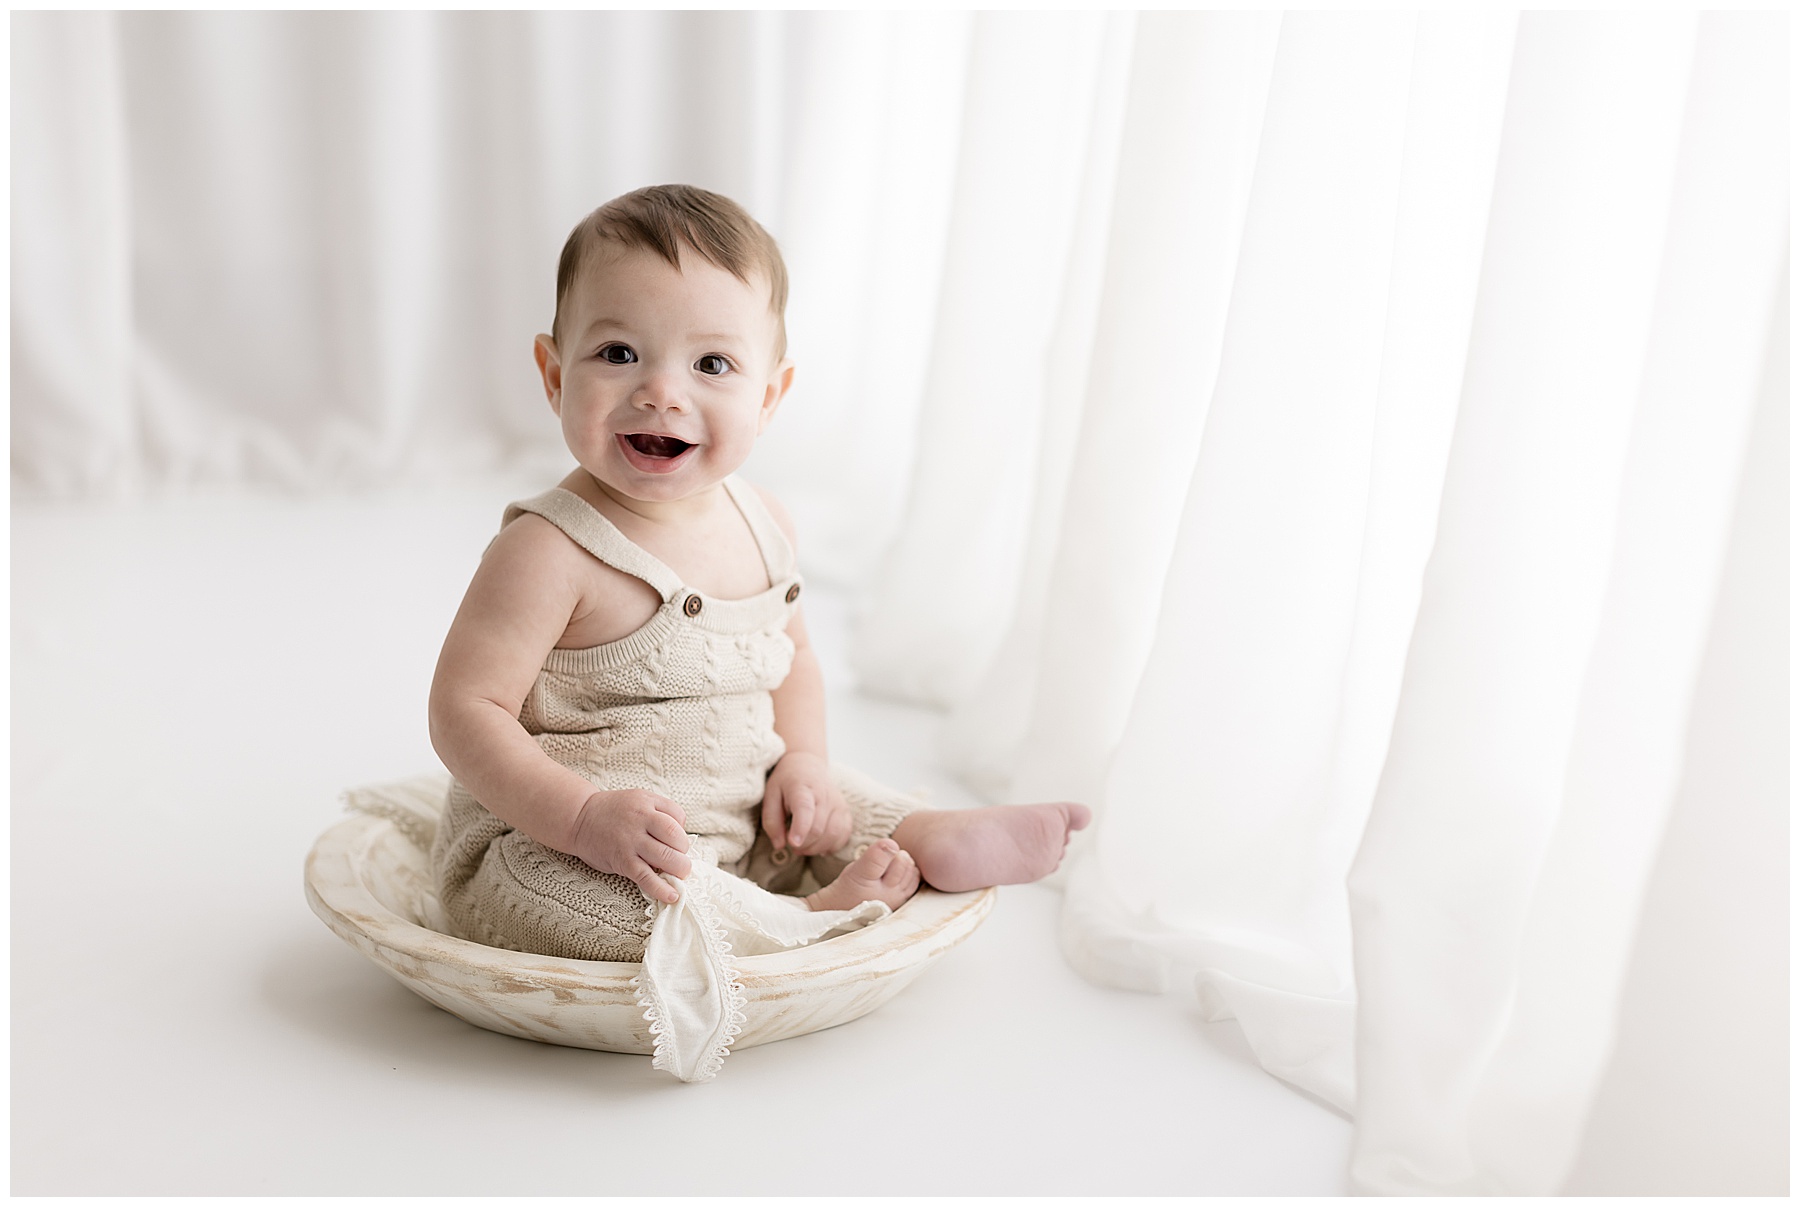 Creating connection in baby photography